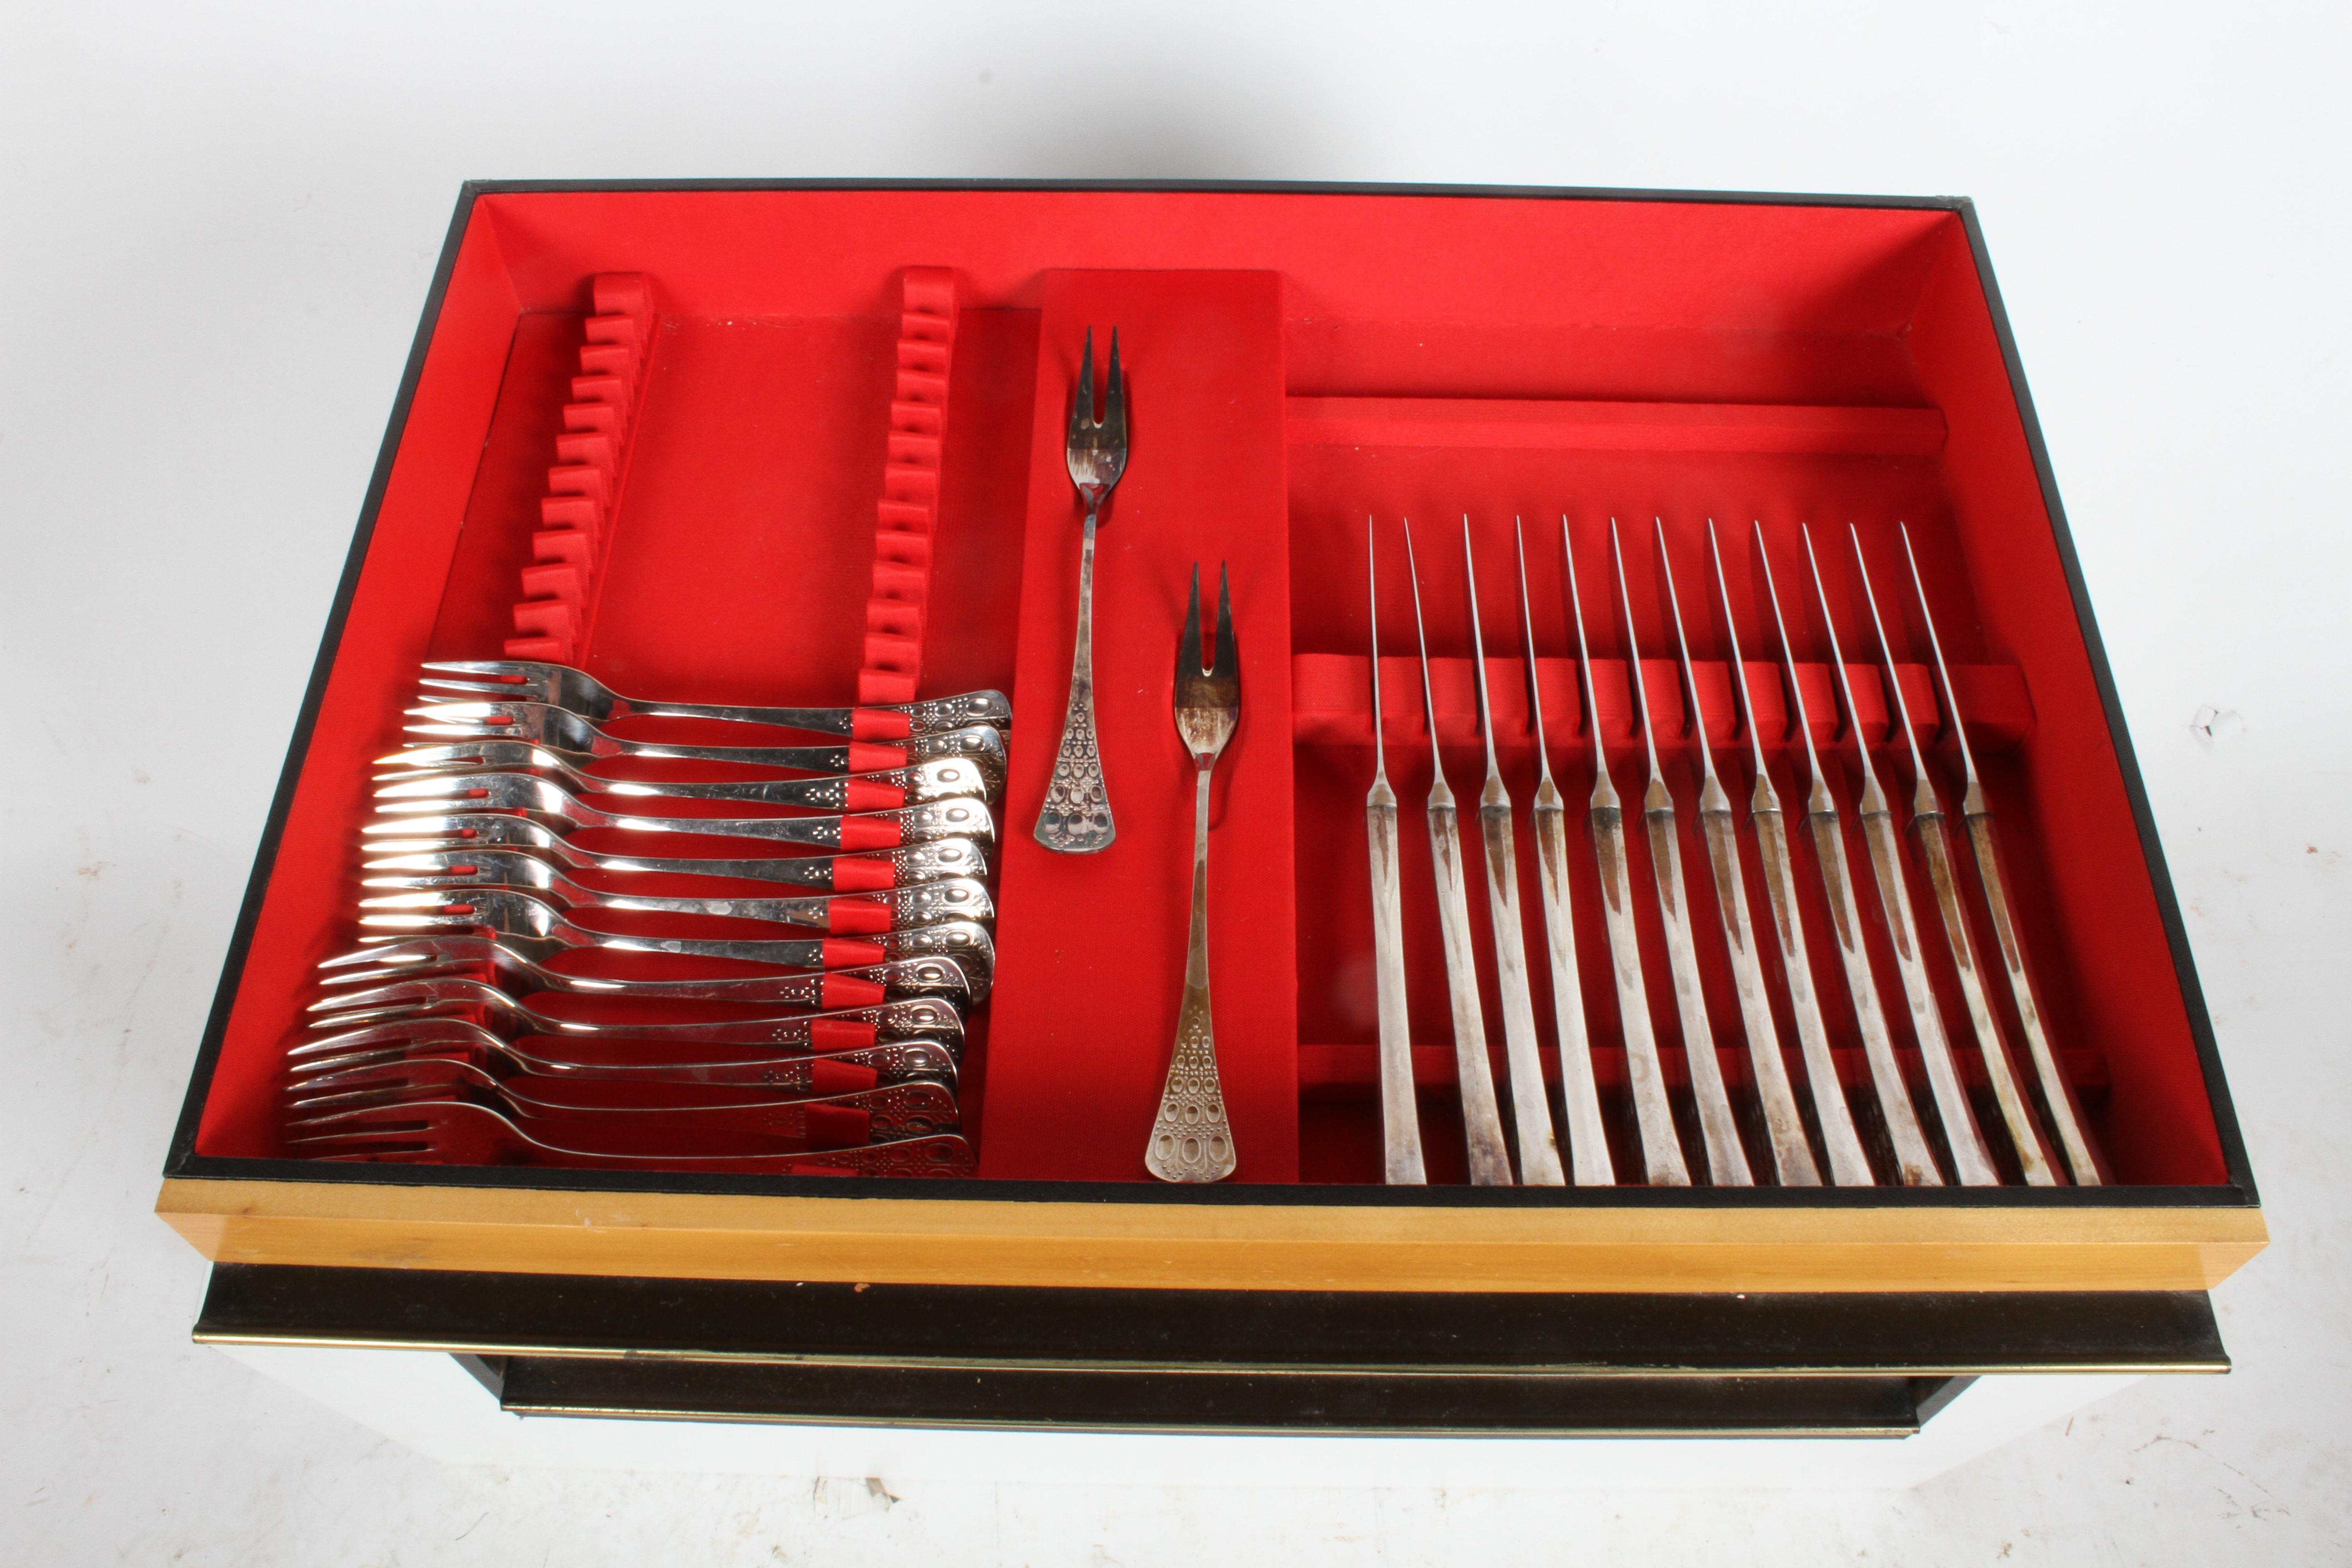 Romance, Bijorn Windblad Rosenthal Silverplate Flatware for 12 with Case 79 Pcs For Sale 1